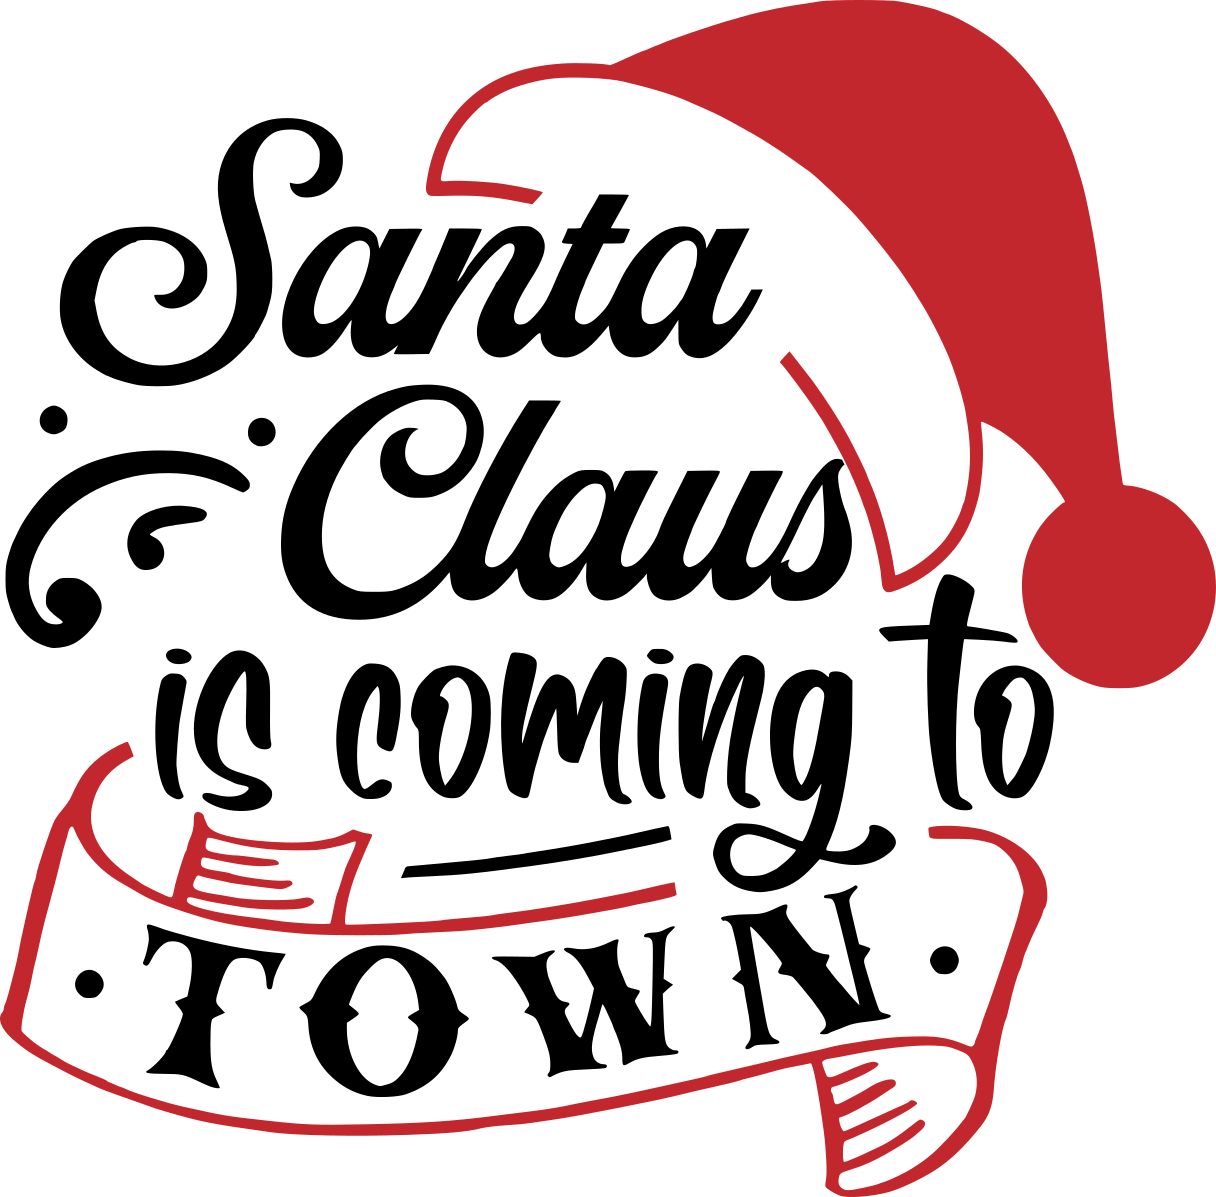 santa-claus-is-coming-to-town